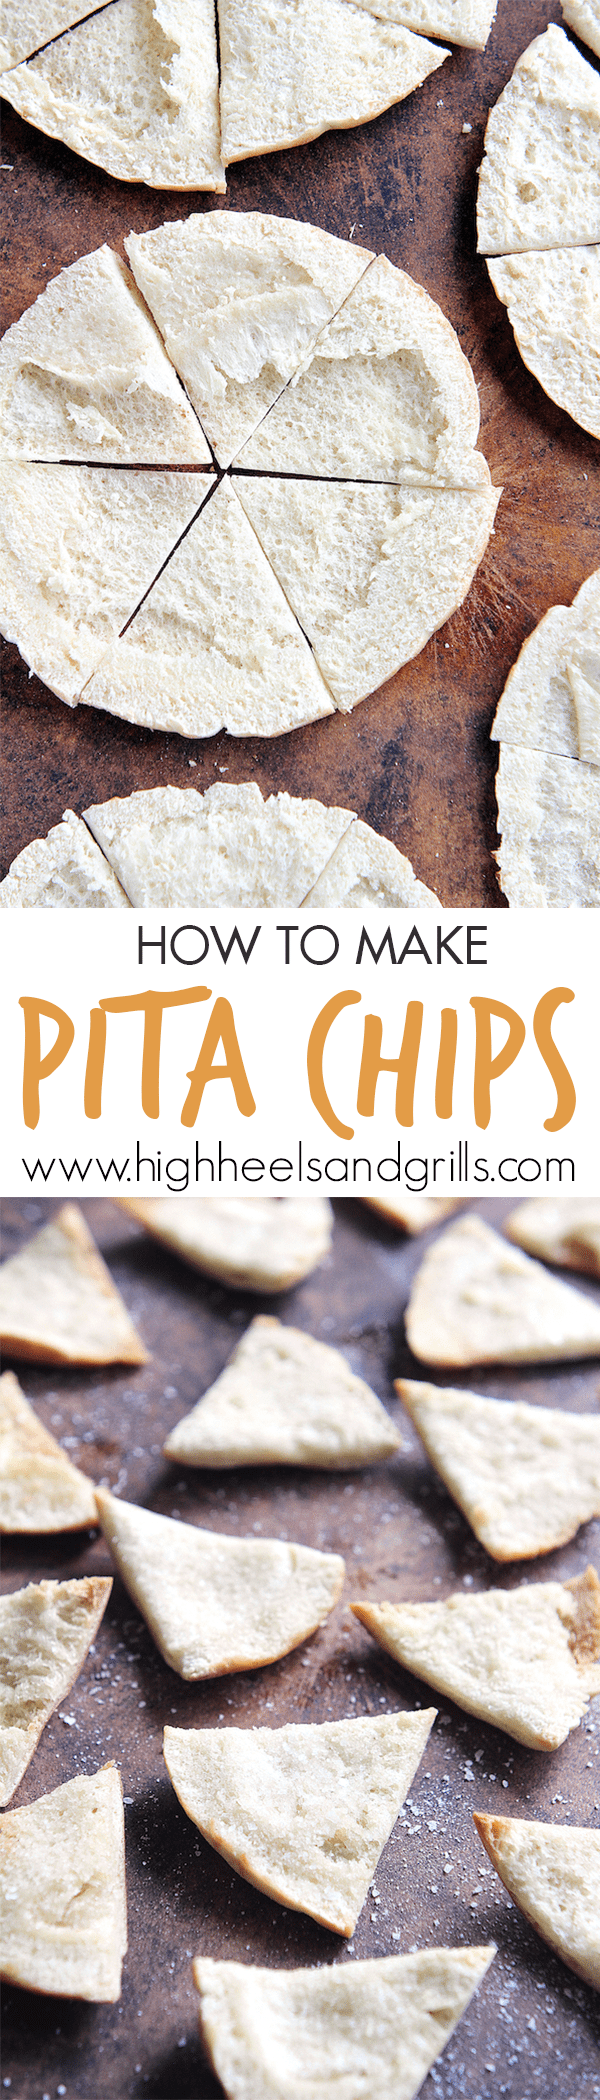 How to Make Pita Chips, the easy way. These are so good and taste way better than store bought pita chips.